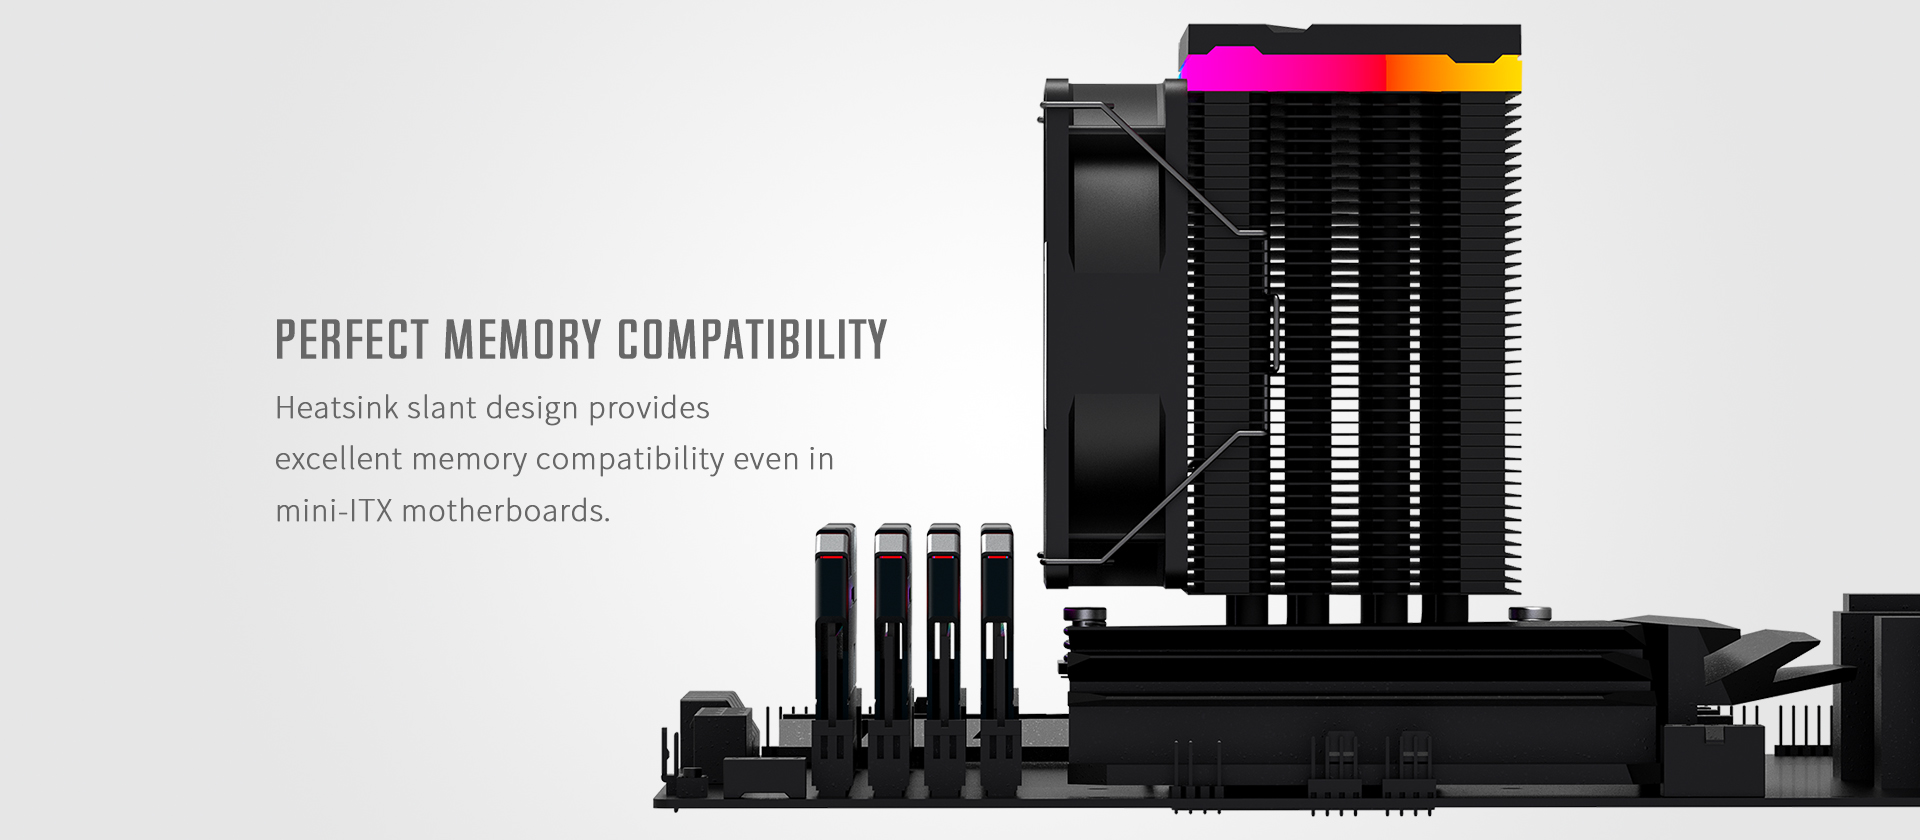 5V 3-PIN Connector ID-COOLING SE-914-XT ARGB Cooler 131mm Height AM4 CPU Cooler Addressable RGB Light on Fan and Top-Cover 4 Heatpipes CPU Air Cooler 92mm PWM Fan Intel/AMD 